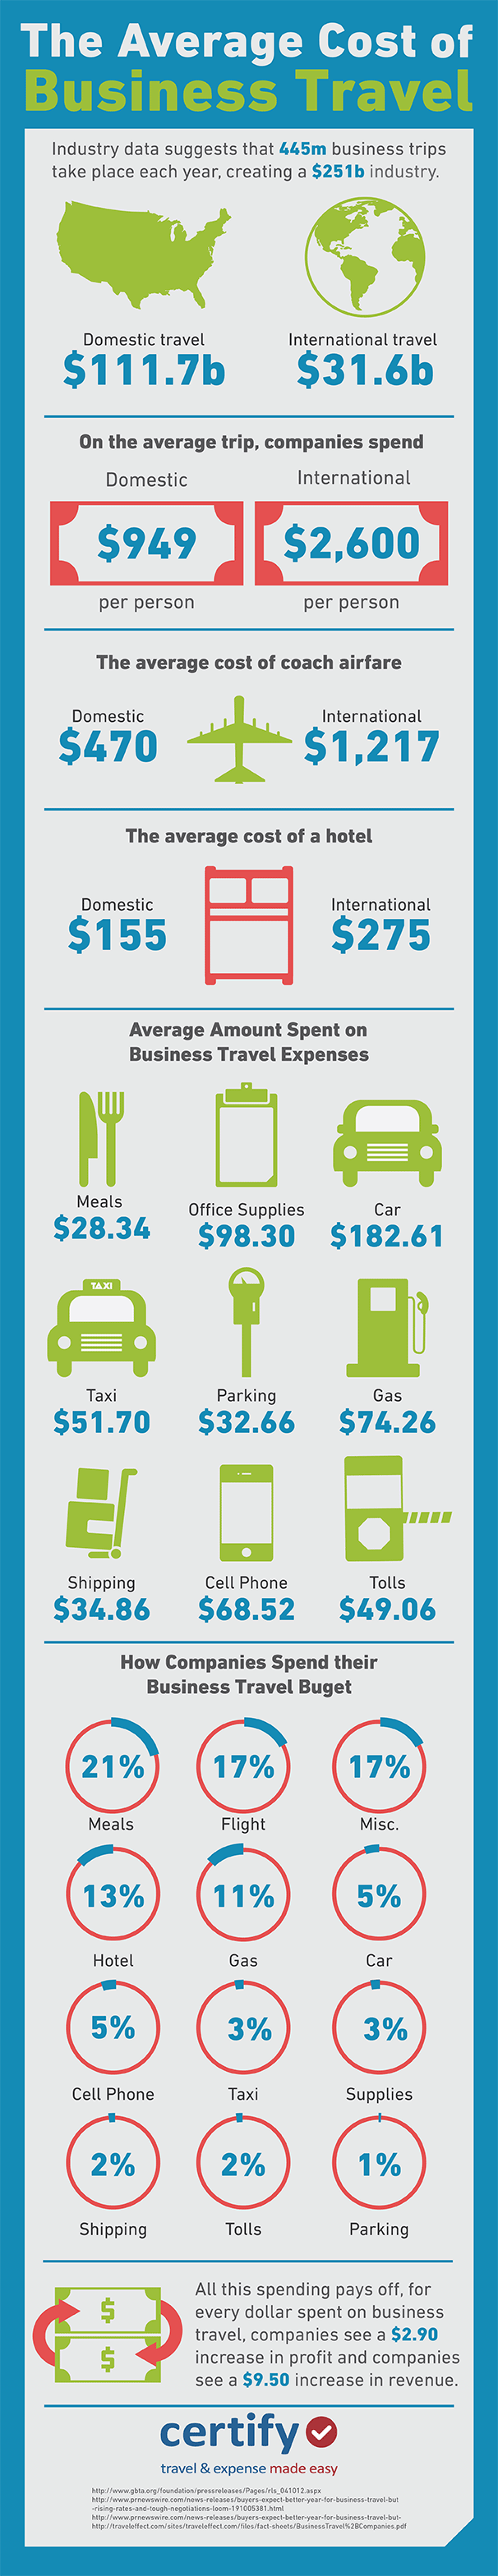 Infographic - The Average Cost of Business Travel